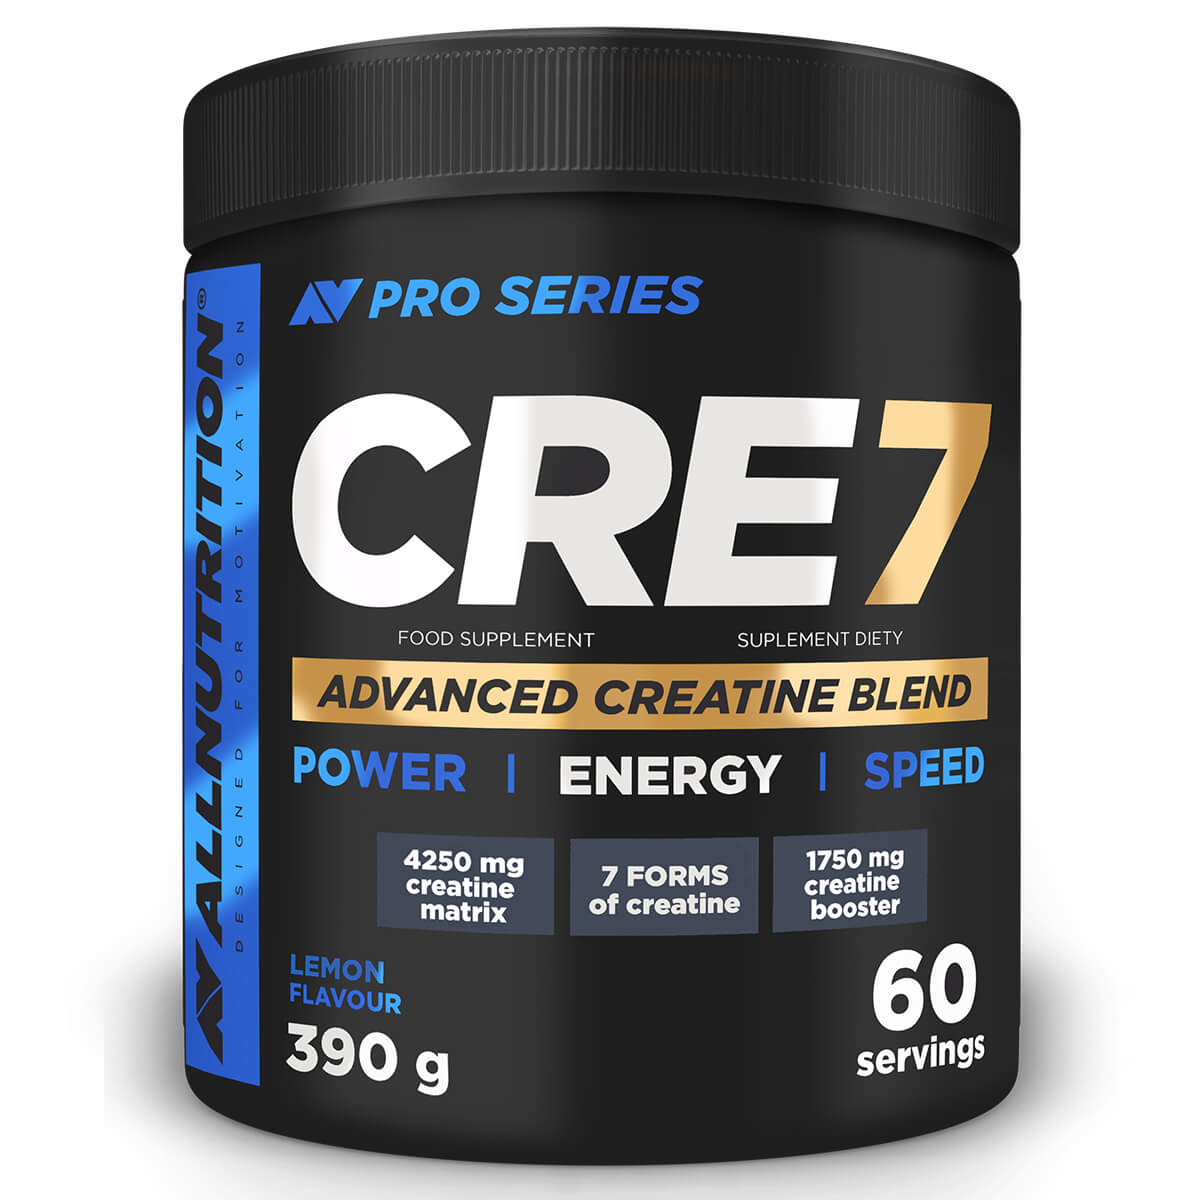 All Nutrition Pro Series Cre7-390g